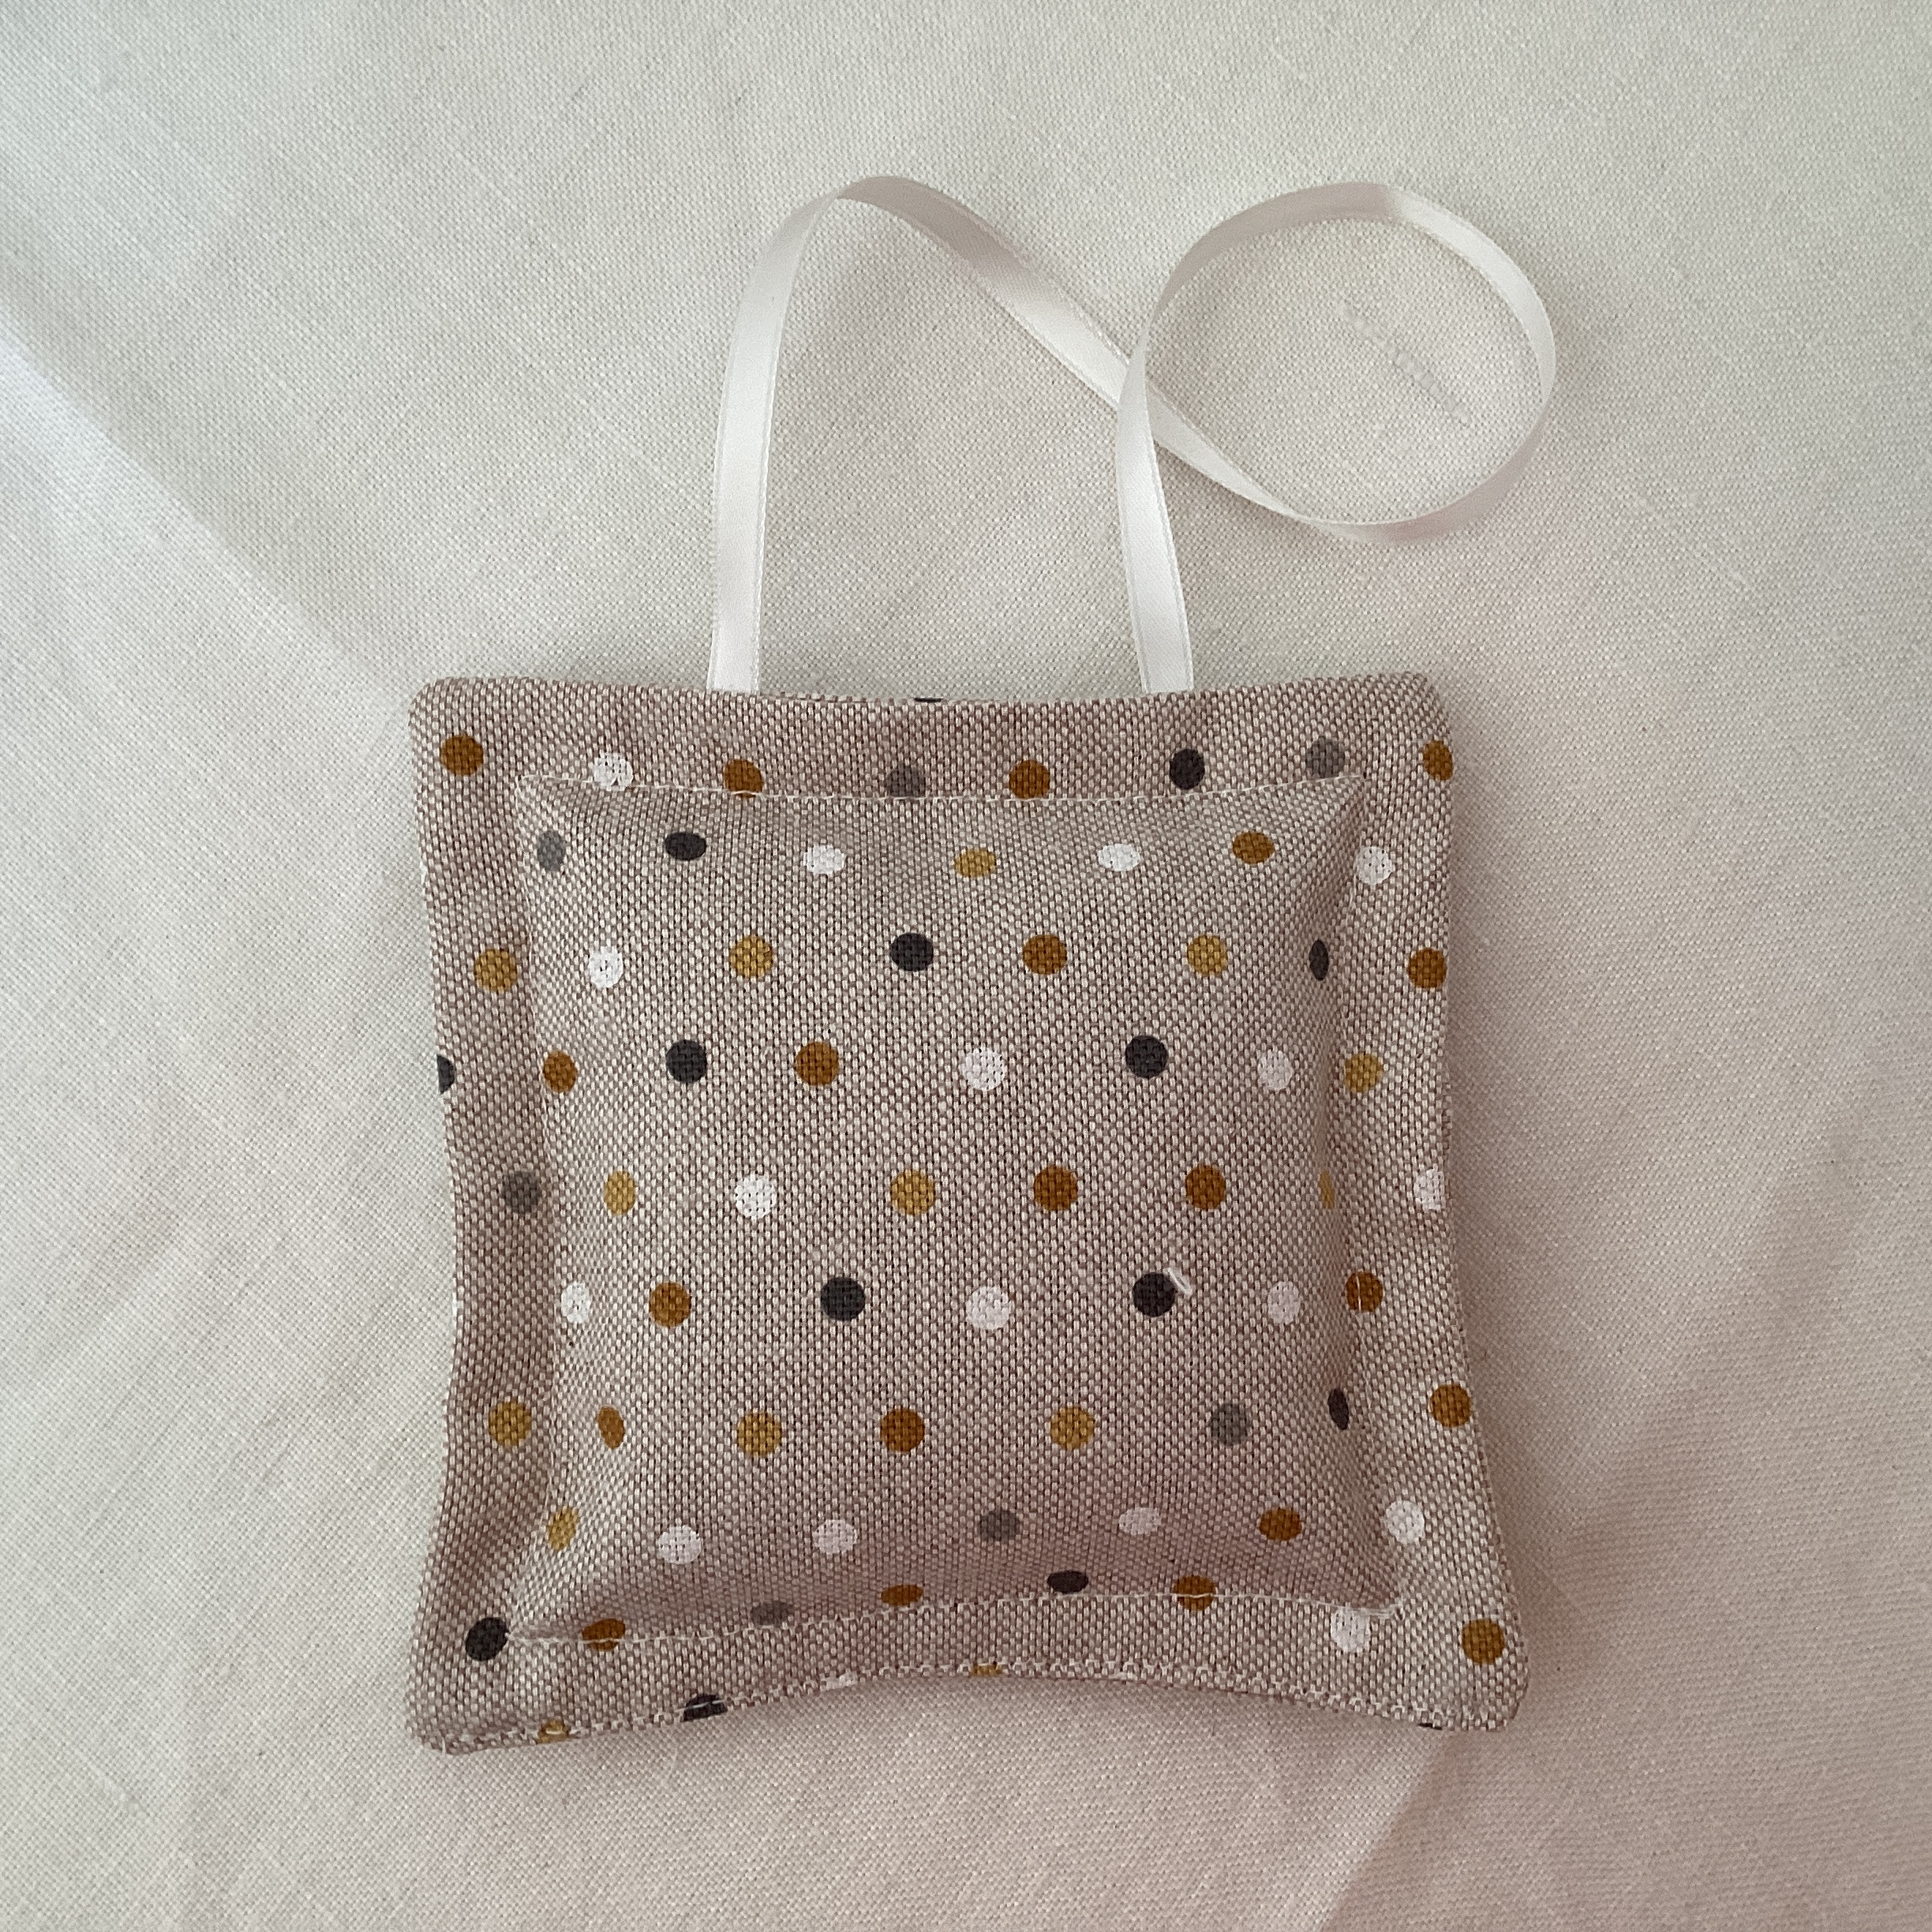 Lavender Bag - beige with mustard and white spots